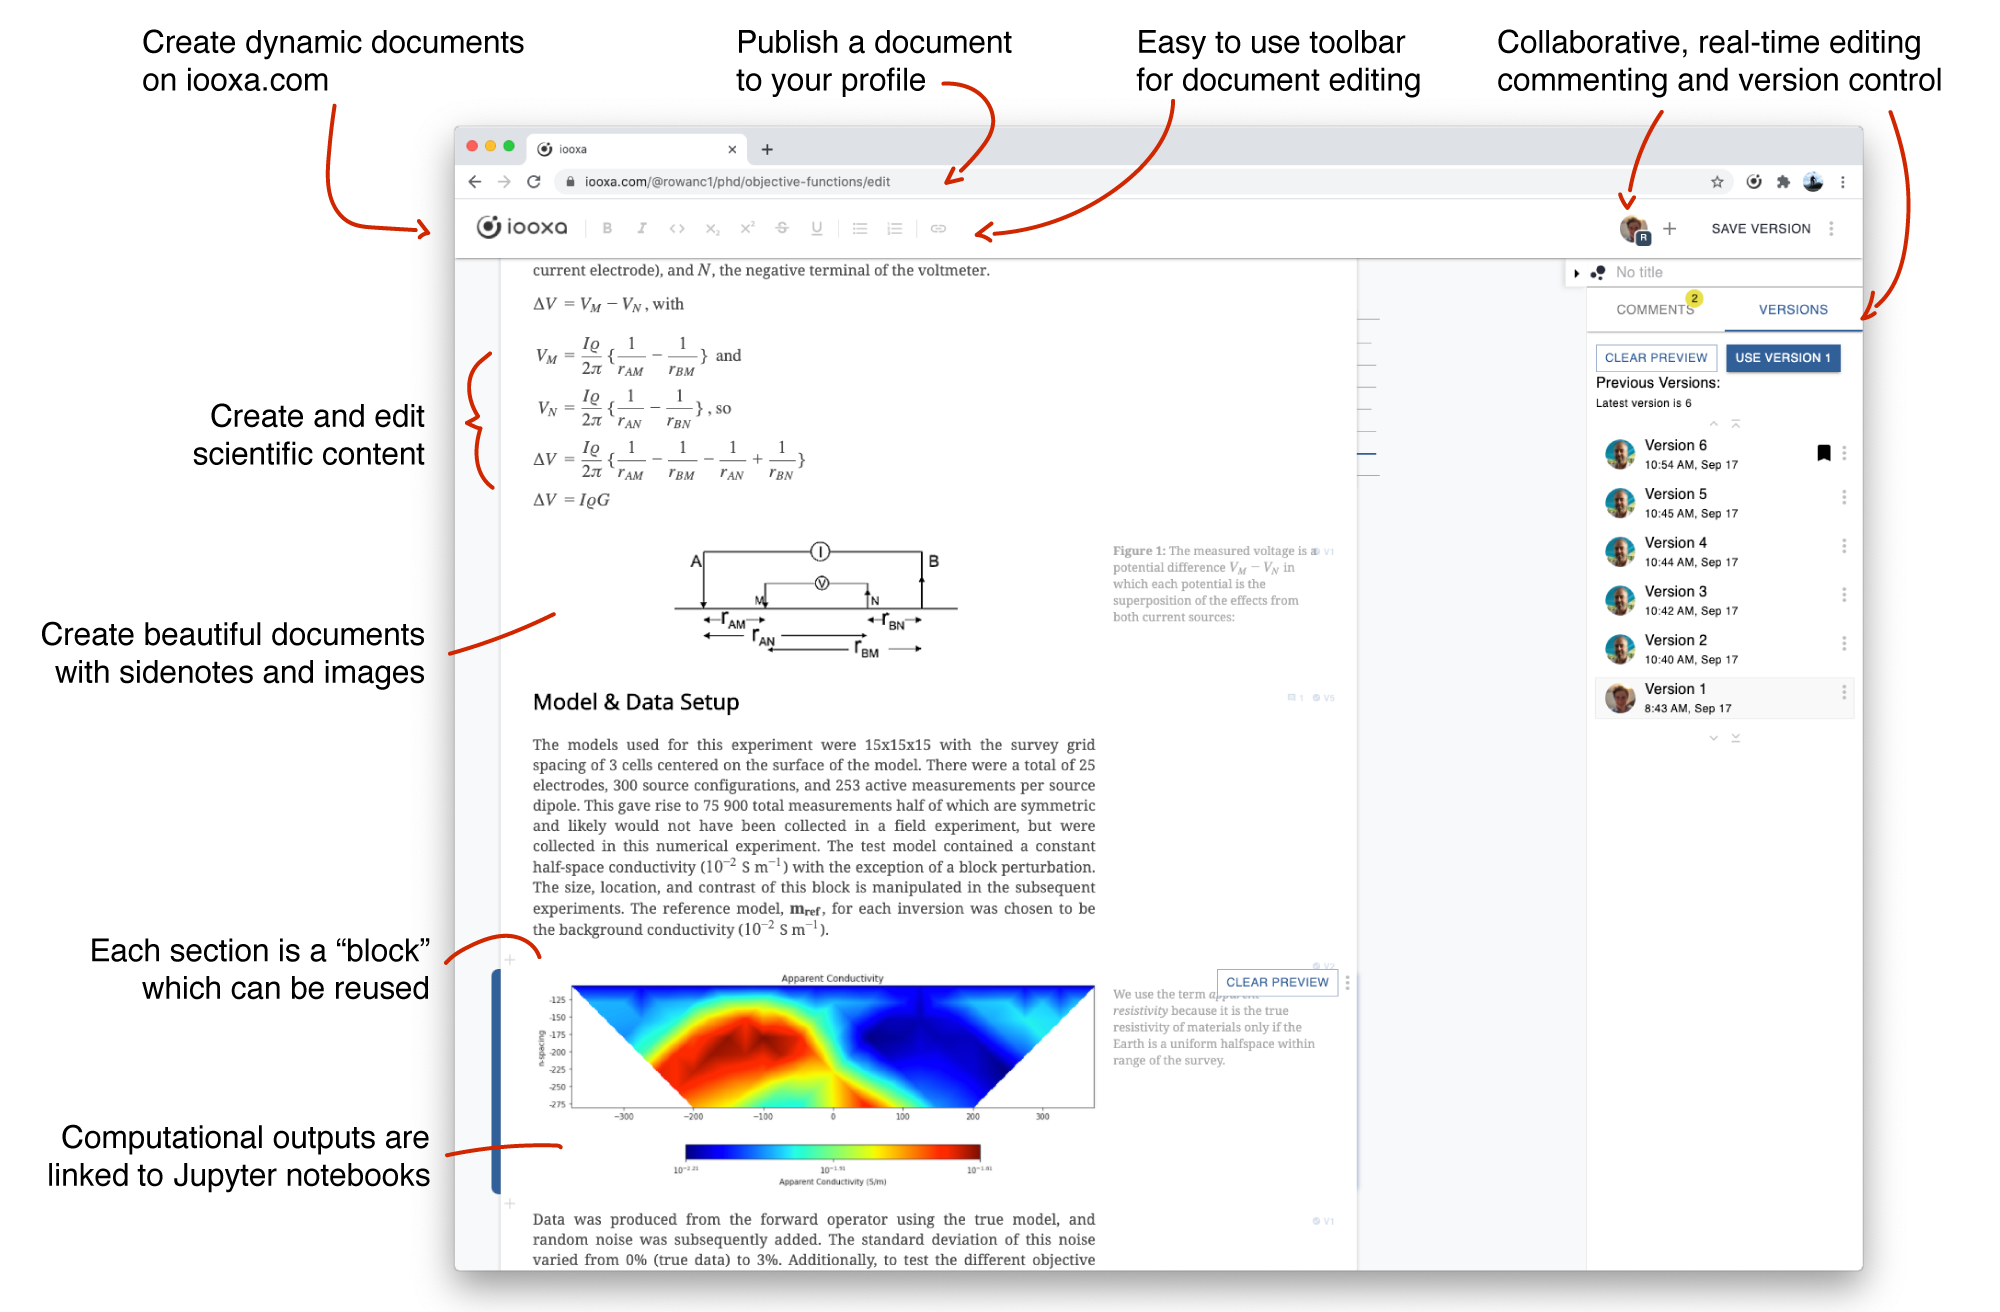 Create dynamic documents using Curvenote and publish them to your profile. The outputs from a Jupyter Notebook can remain interactive as well as be linked to where they were produced. The Curvenote environment allows for rich, real-time document editing and collaboration all under version control.